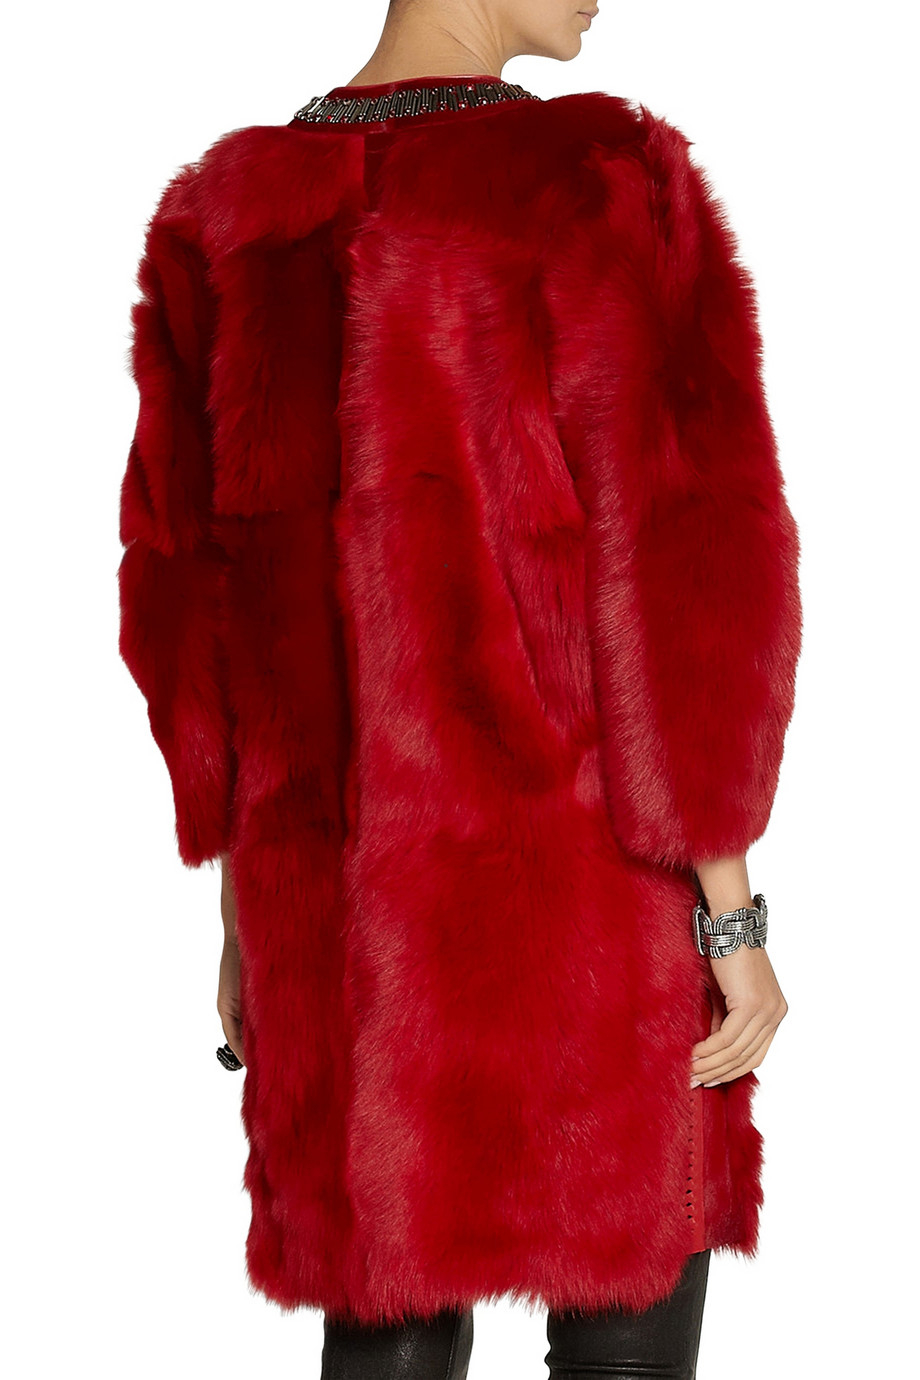 Lyst - Roberto Cavalli Embellished Shearling Coat in Red